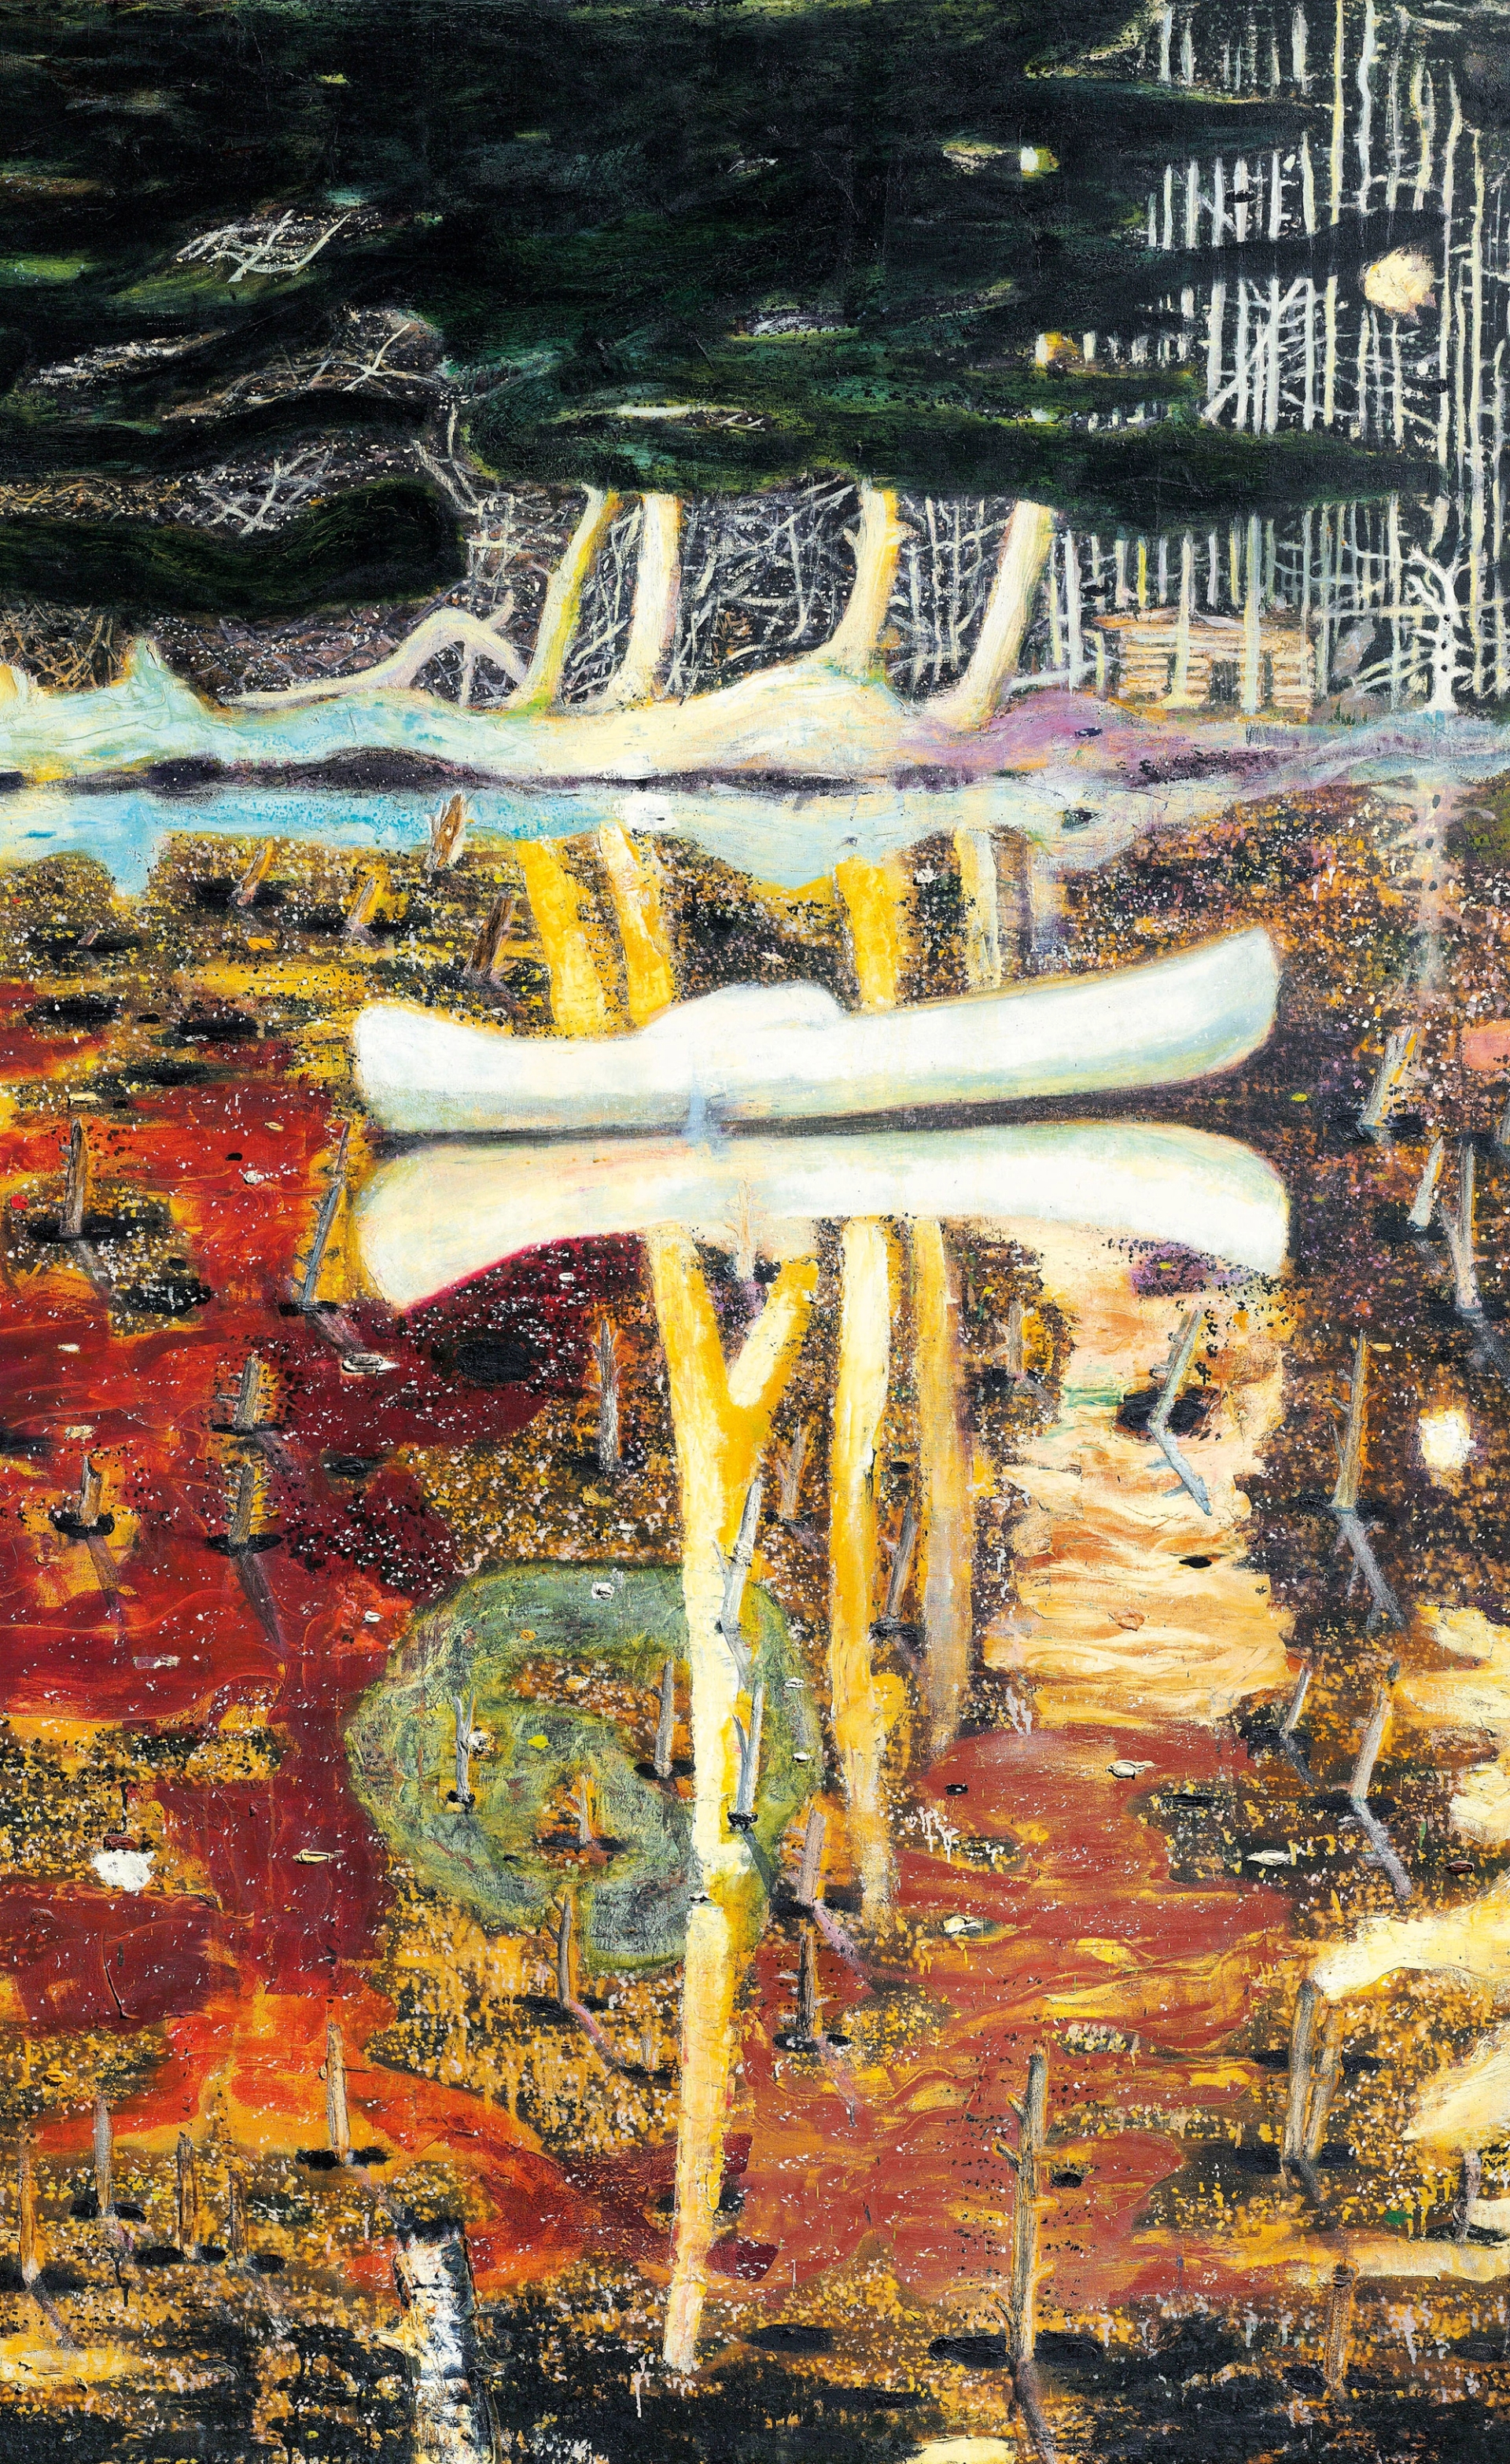 Peter Doig: Cabins and Canoes. The unreasonable silence of the world at Faurschou Beijing